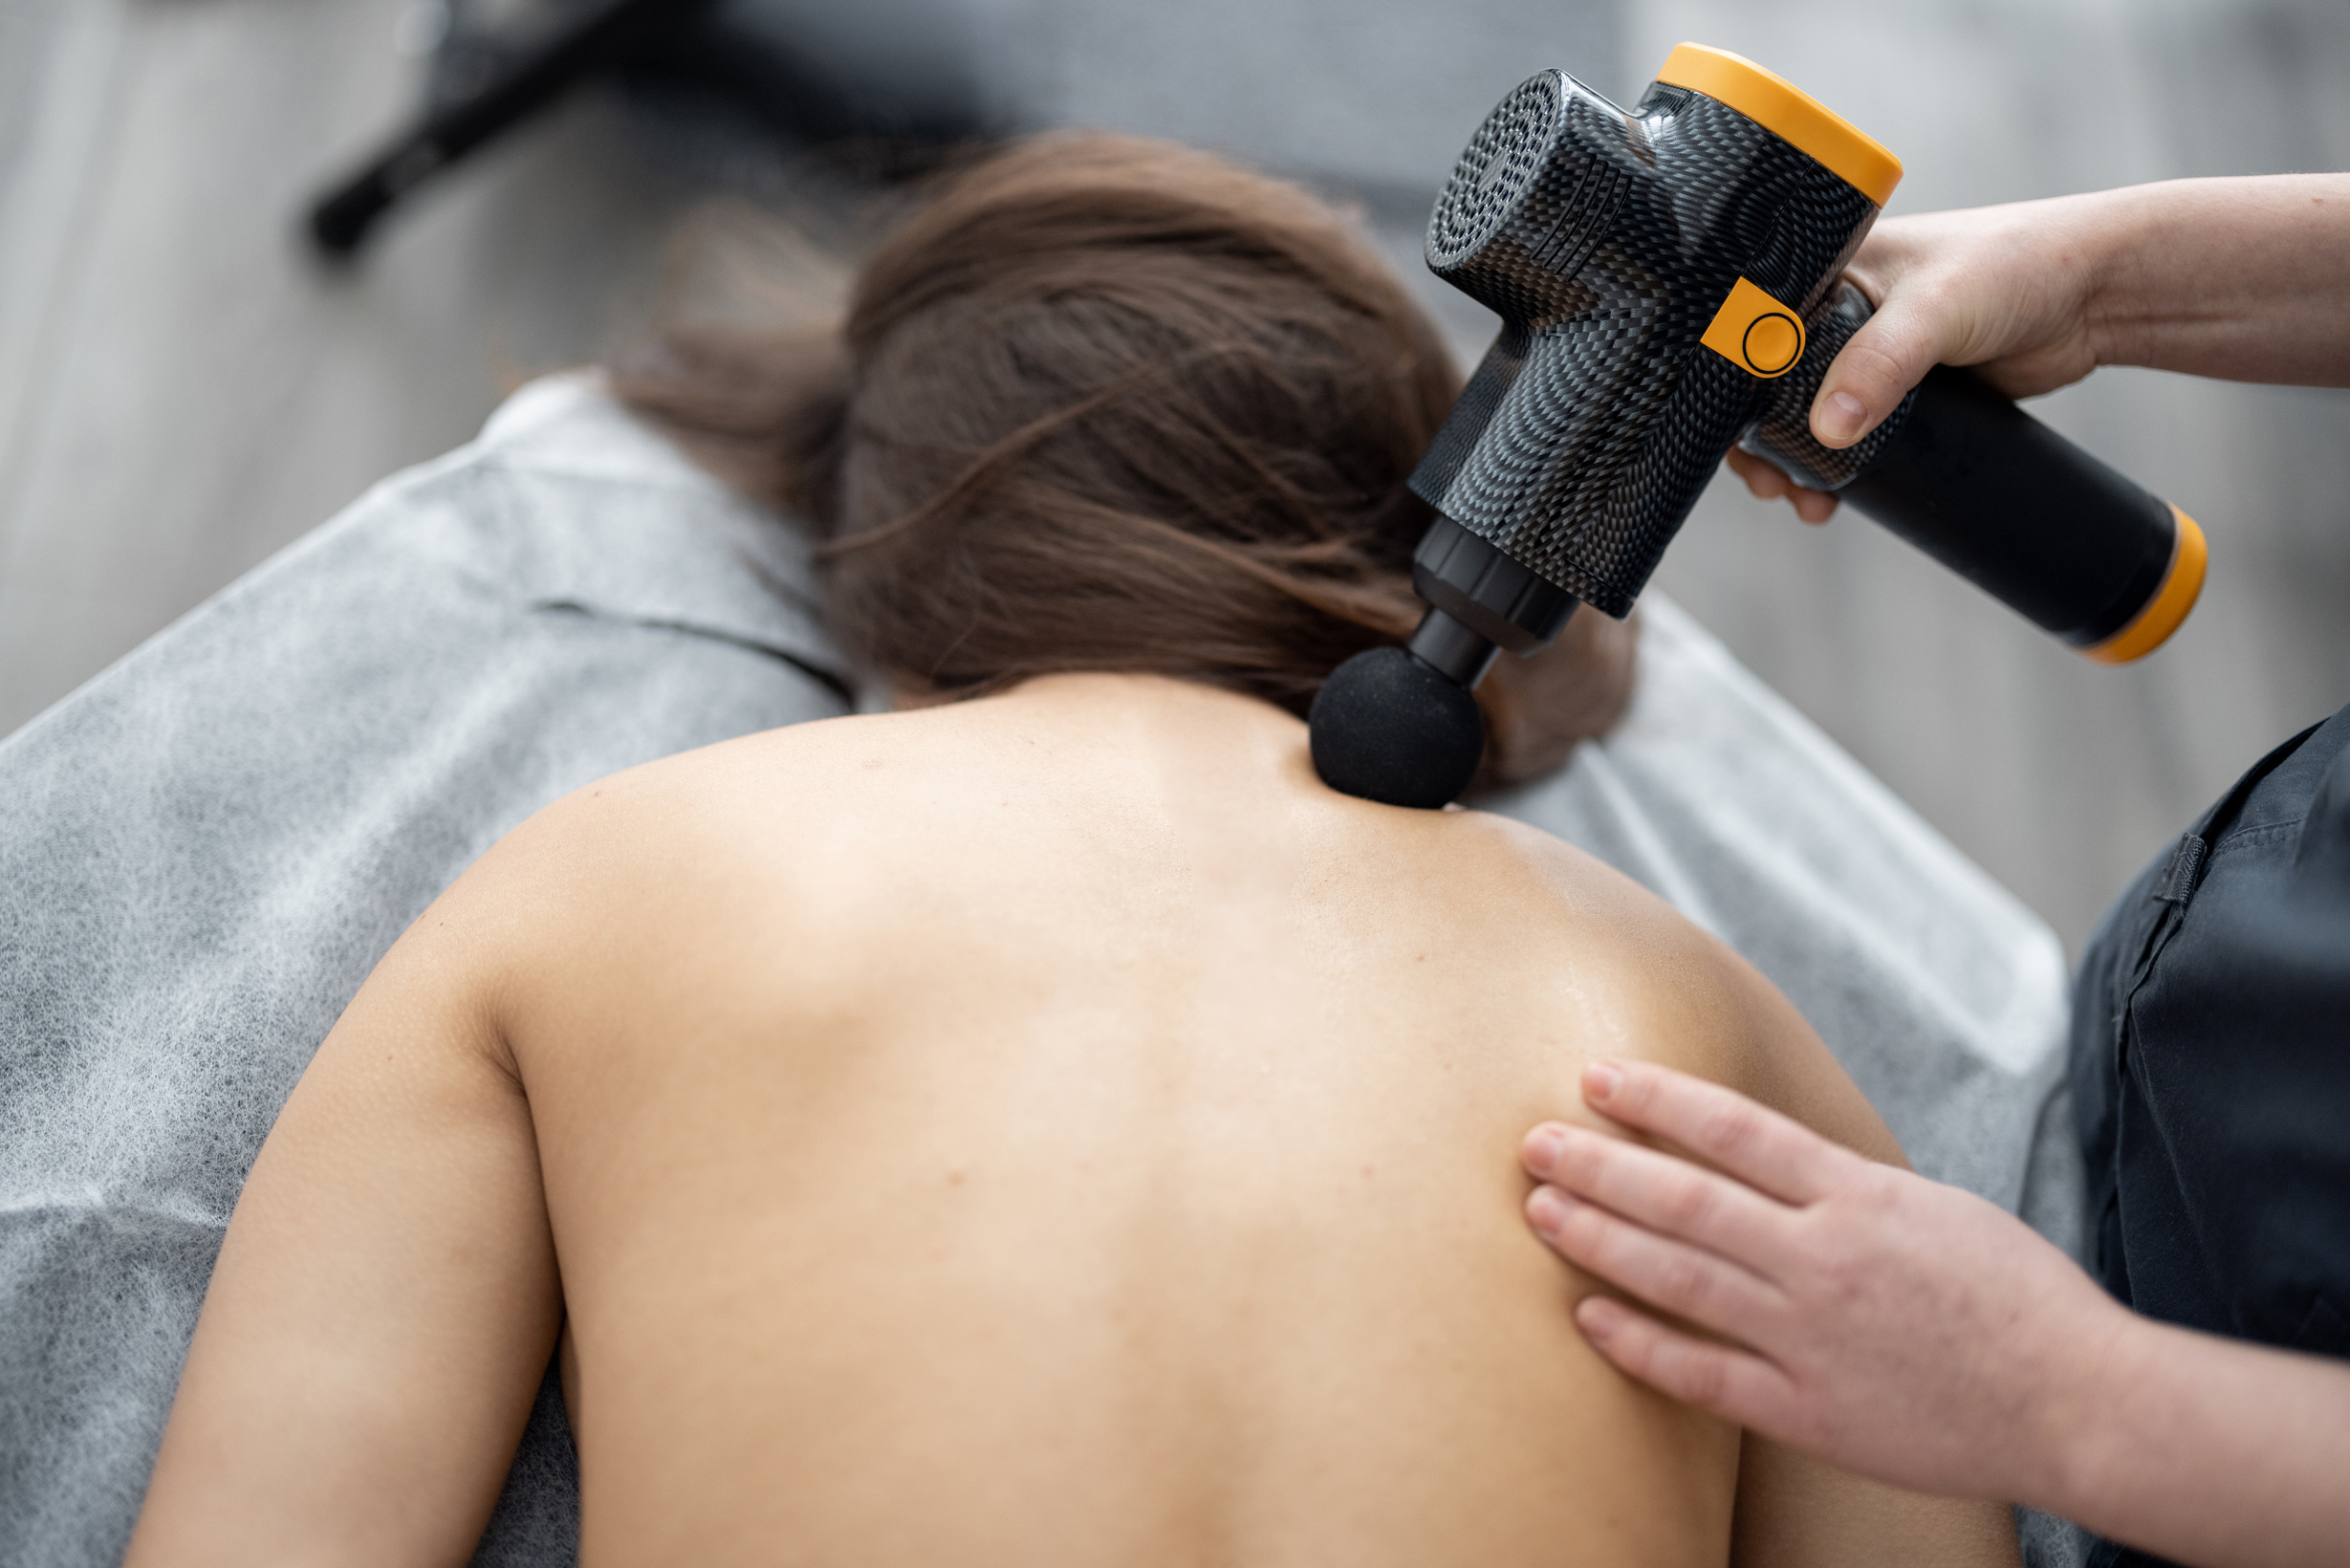 Masseuse Massaging Patient's Back with Percussion Massager